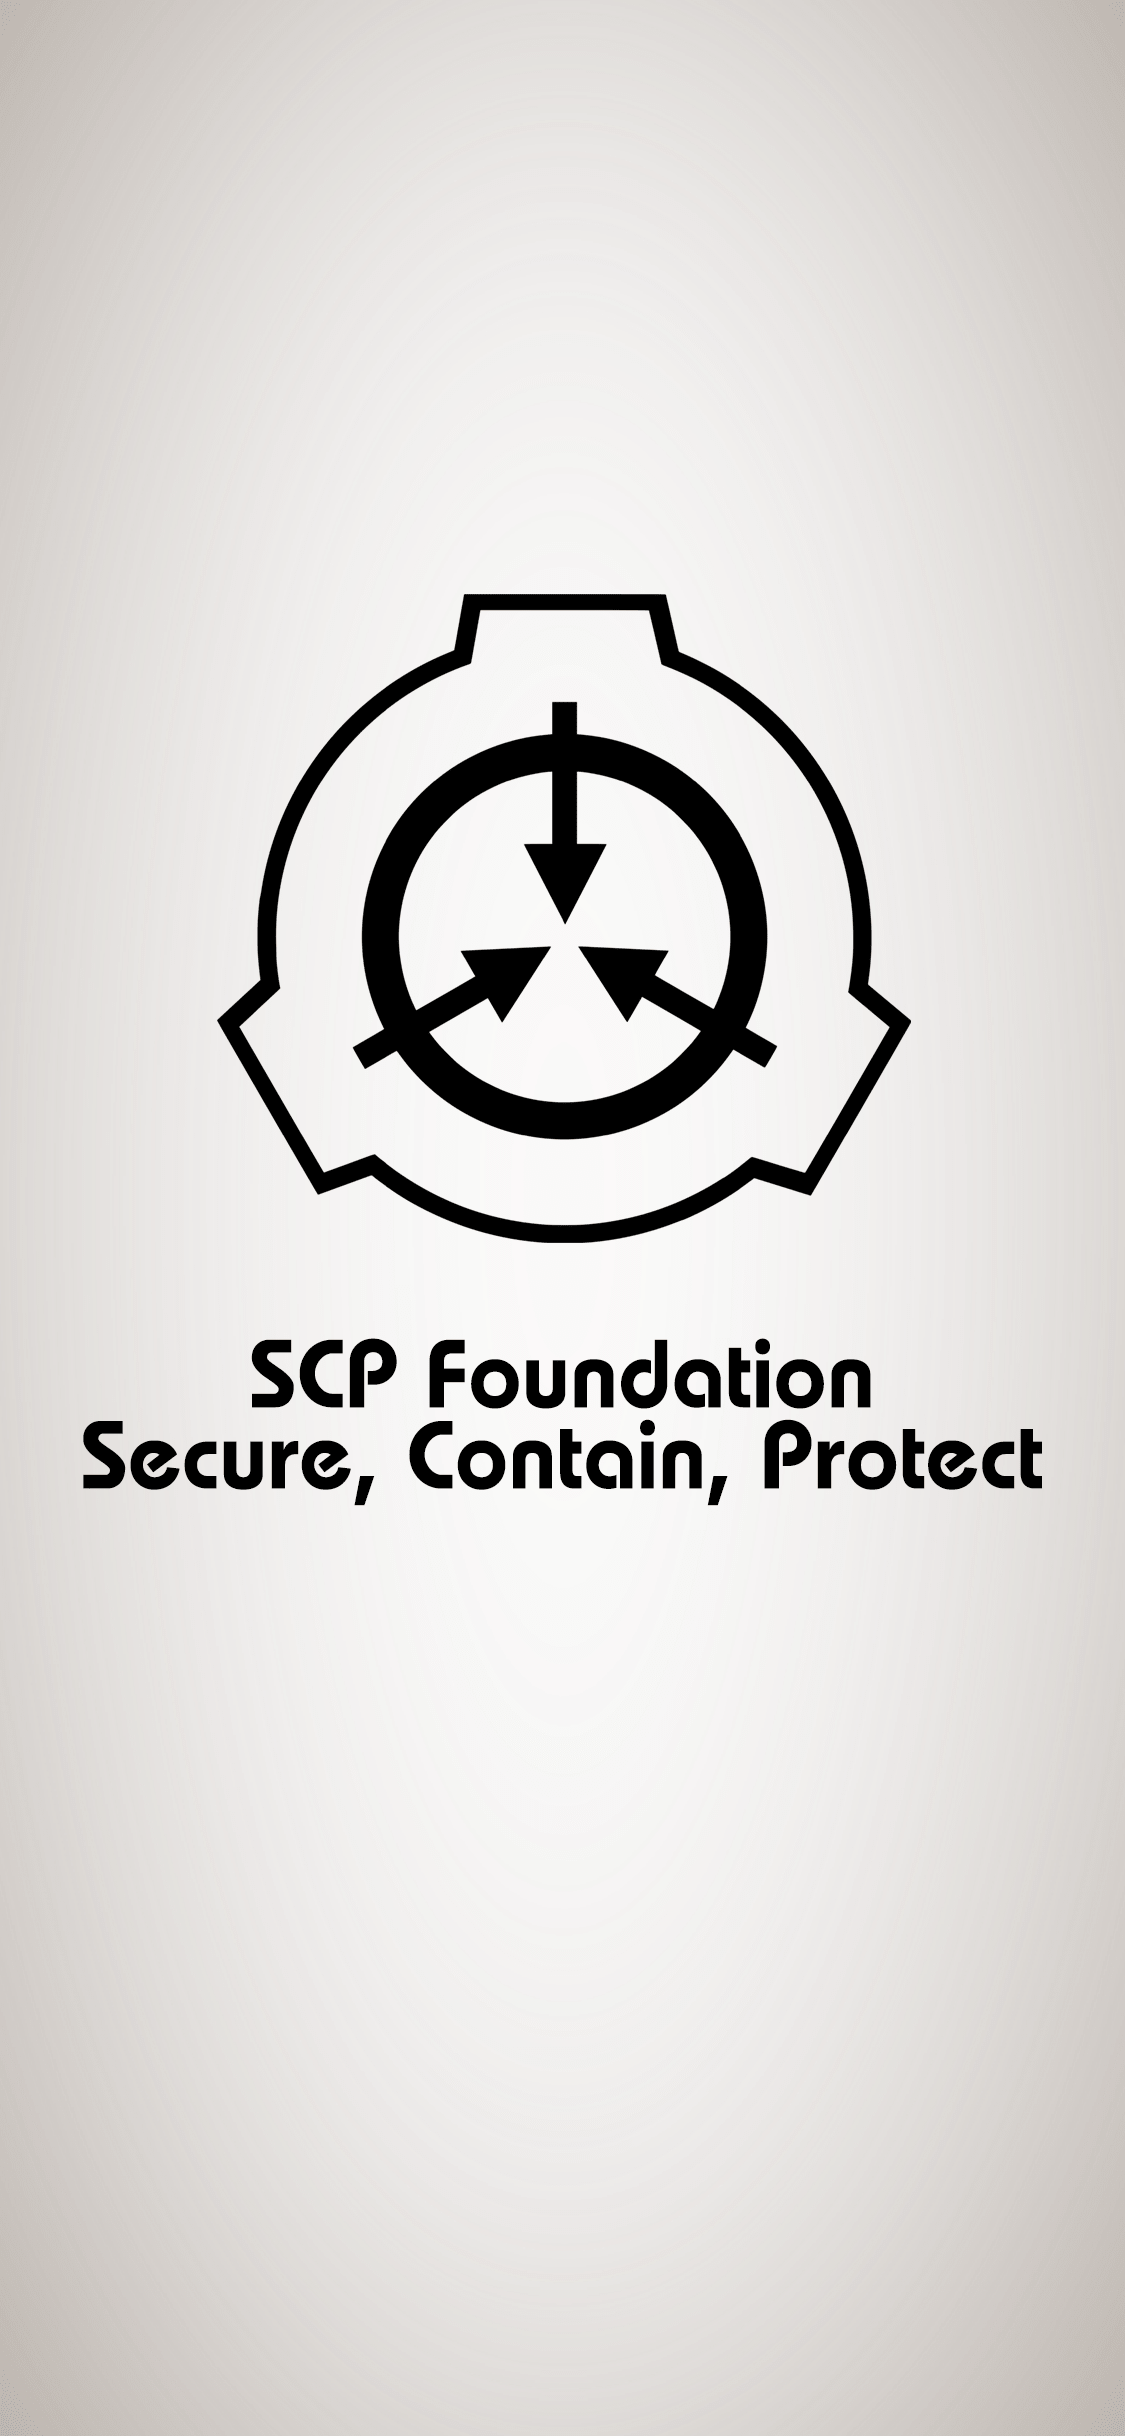 scp wallpapers i made for my phone clear version that you can download   rSCP